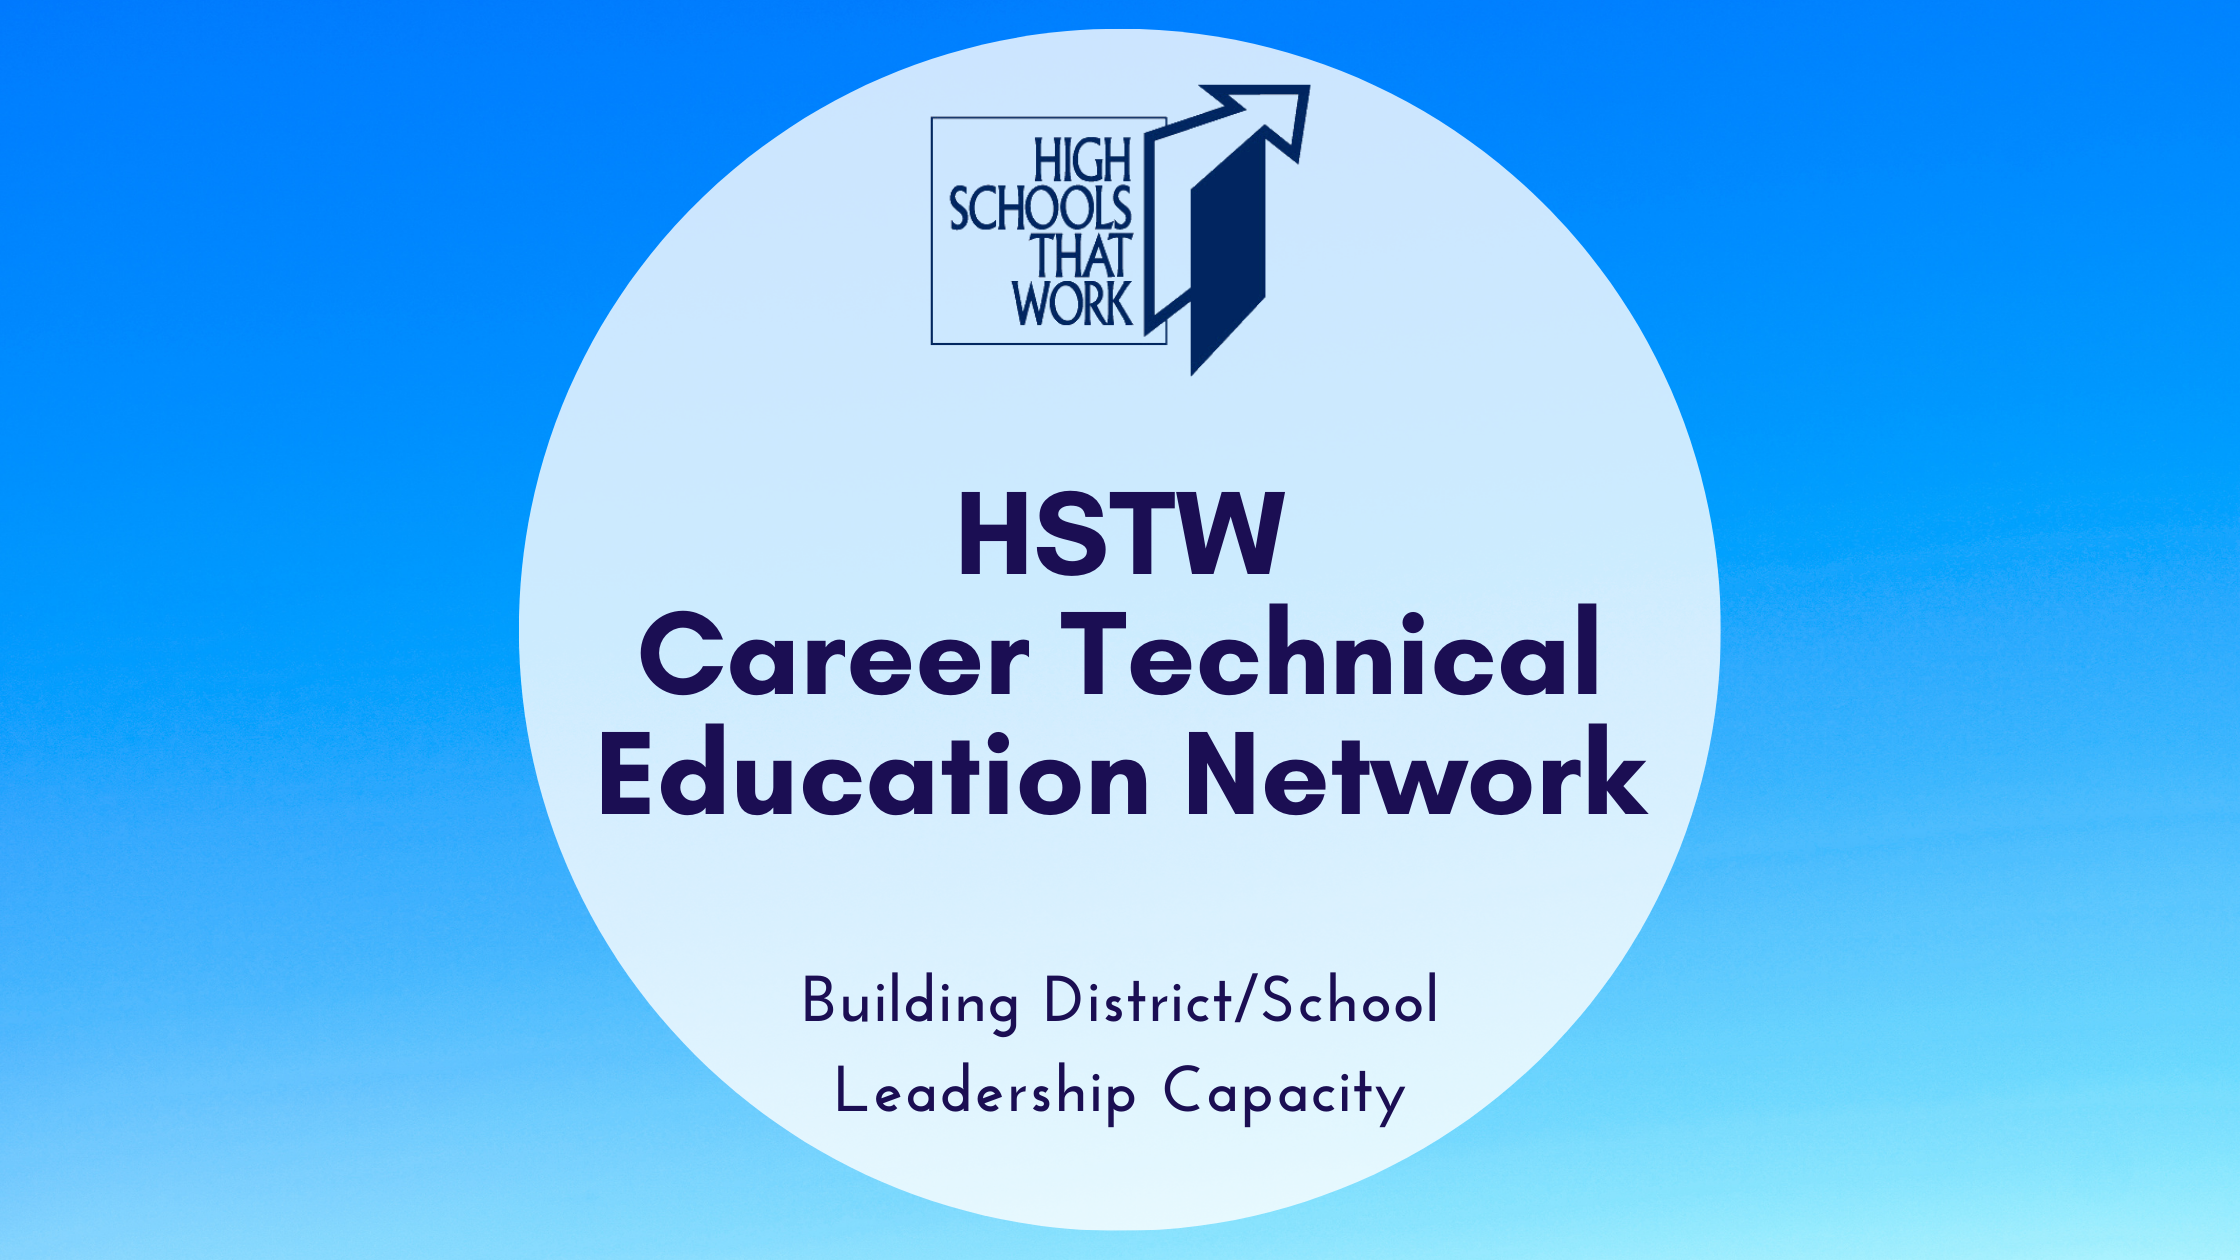 HSTW Career Technical Education Network